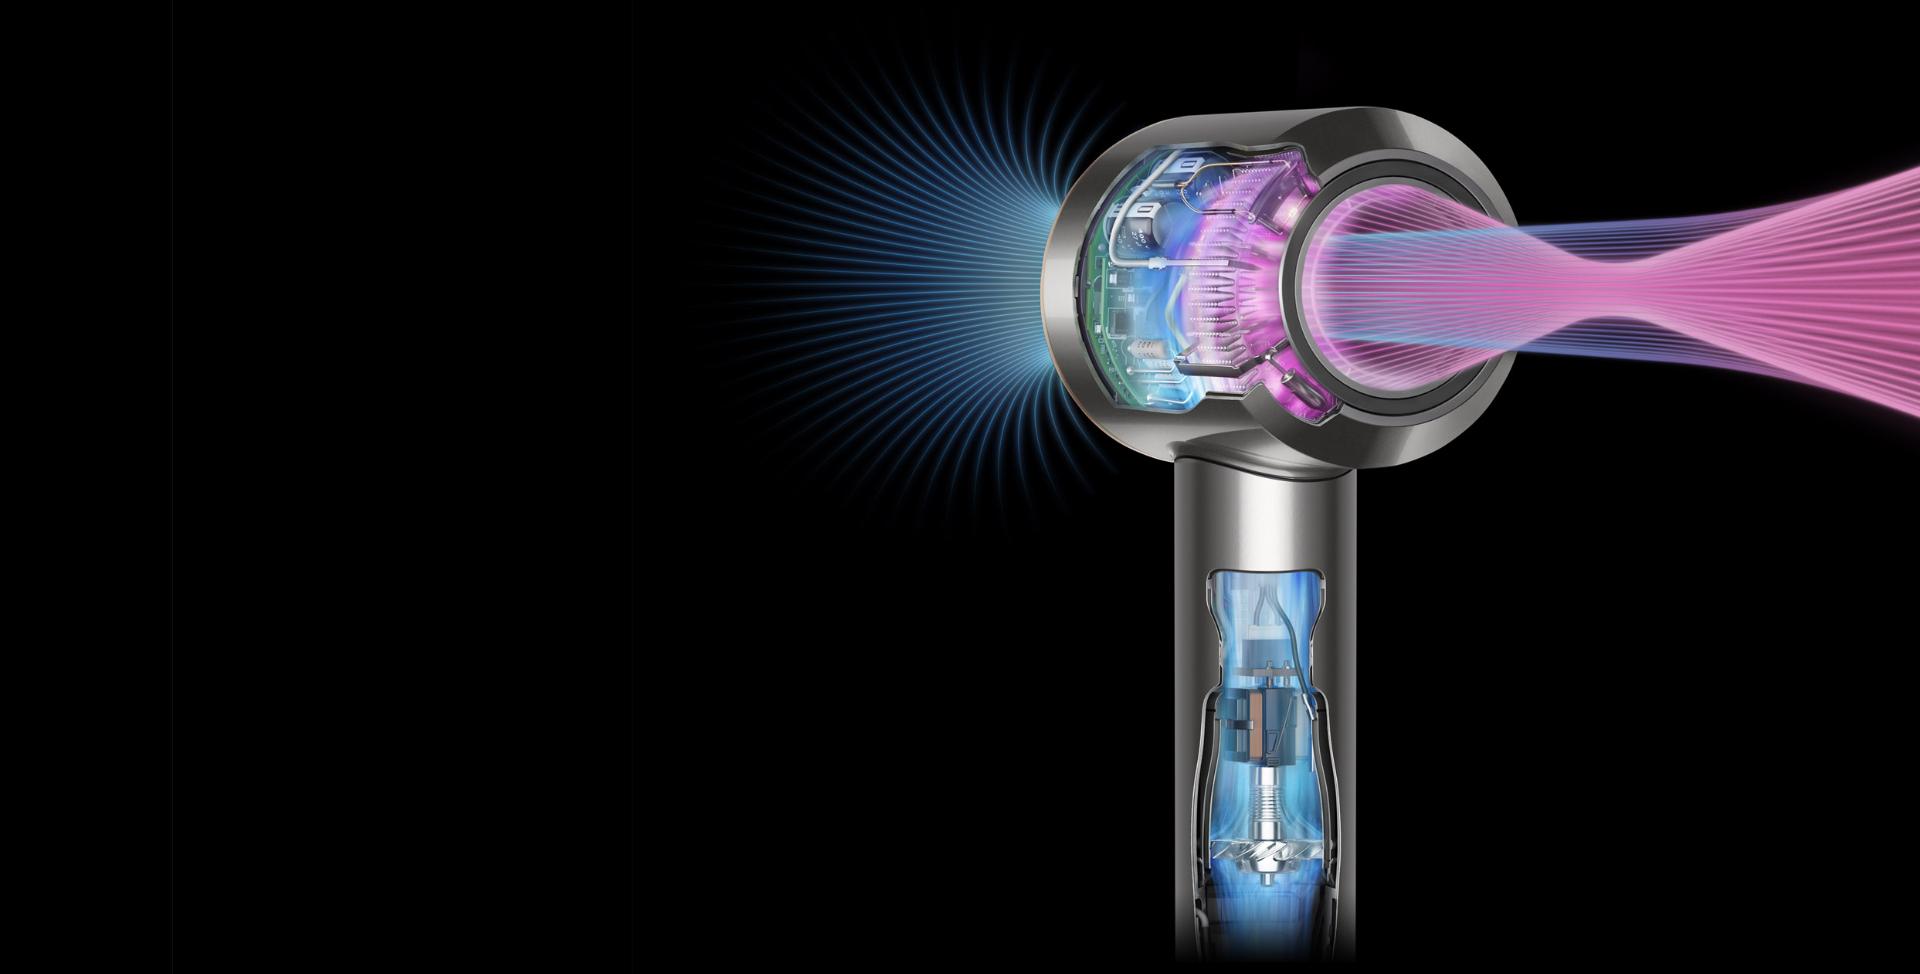 Cutaway showing airflow through the Dyson Supersonic.